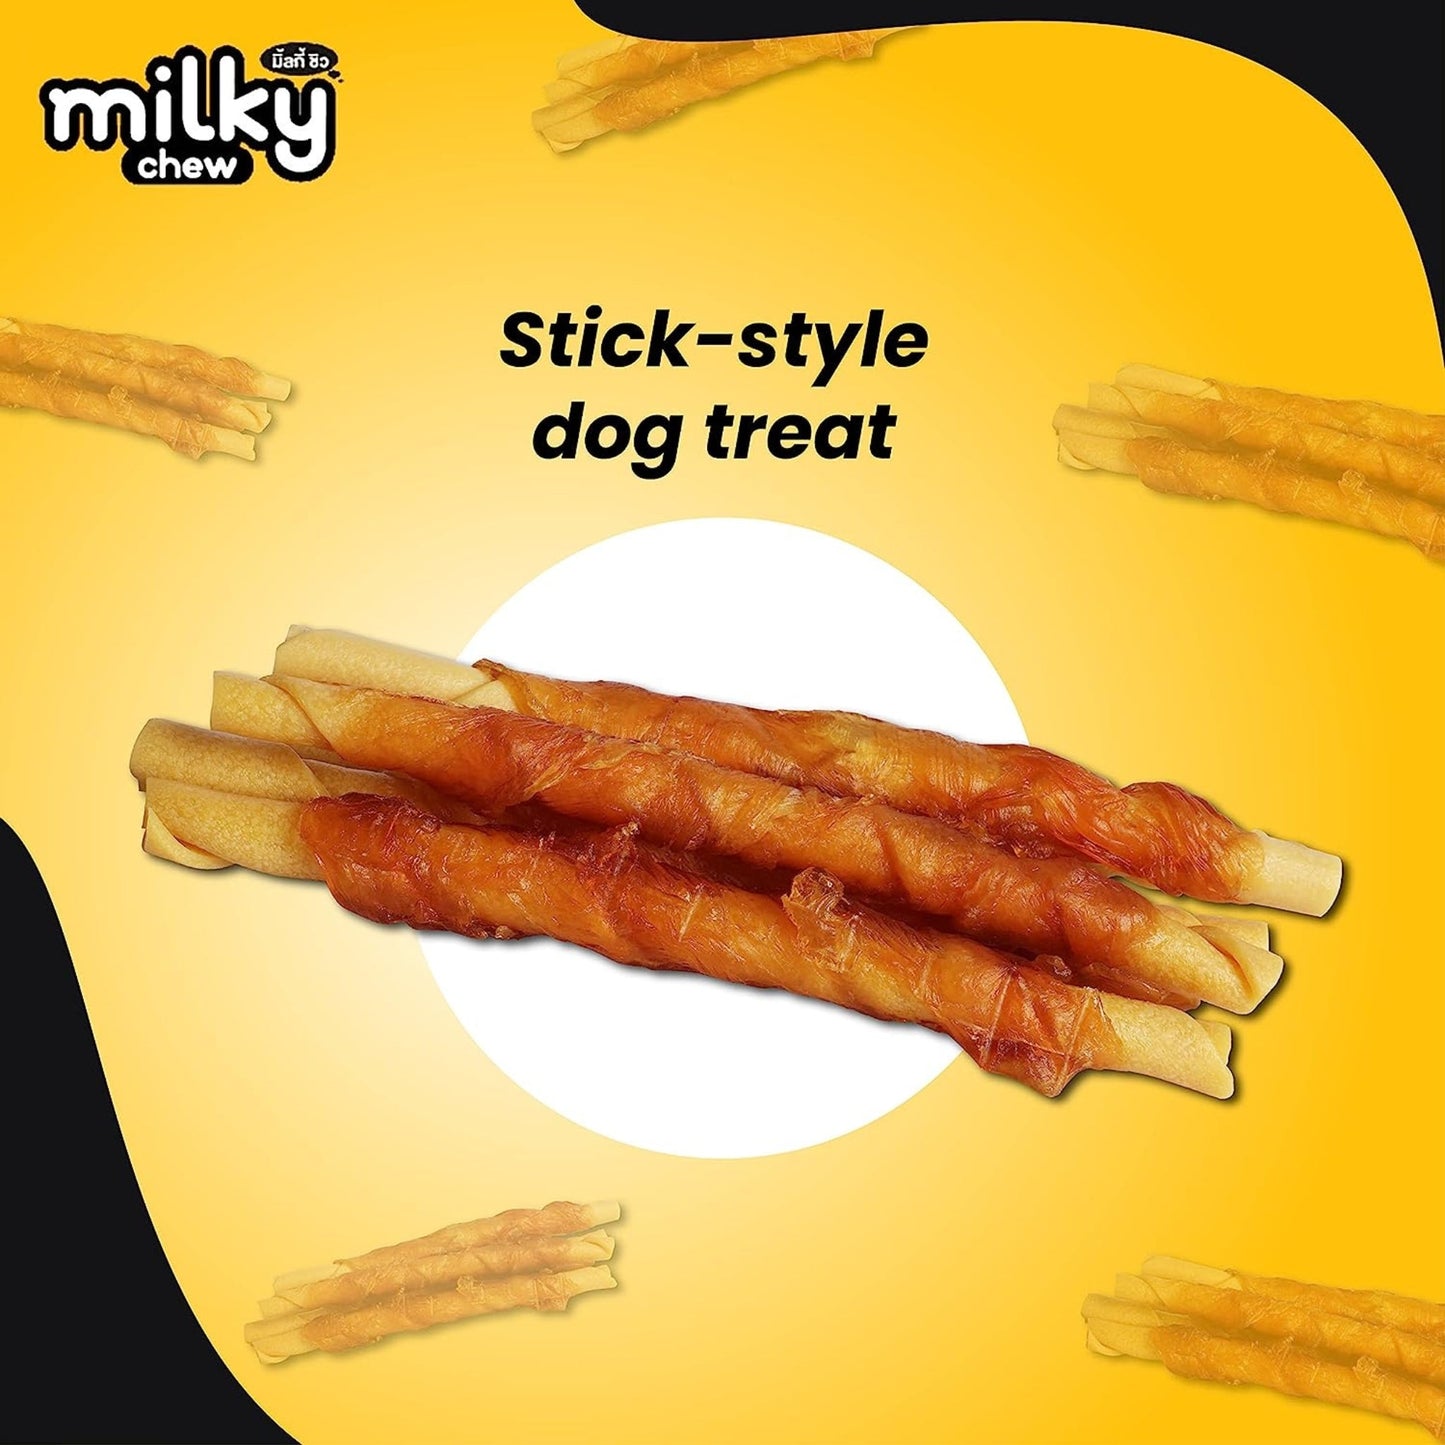 Dogaholic Milky Chew Cheese & Chicken Stick 10in1 Dog Treat, Pack of 5